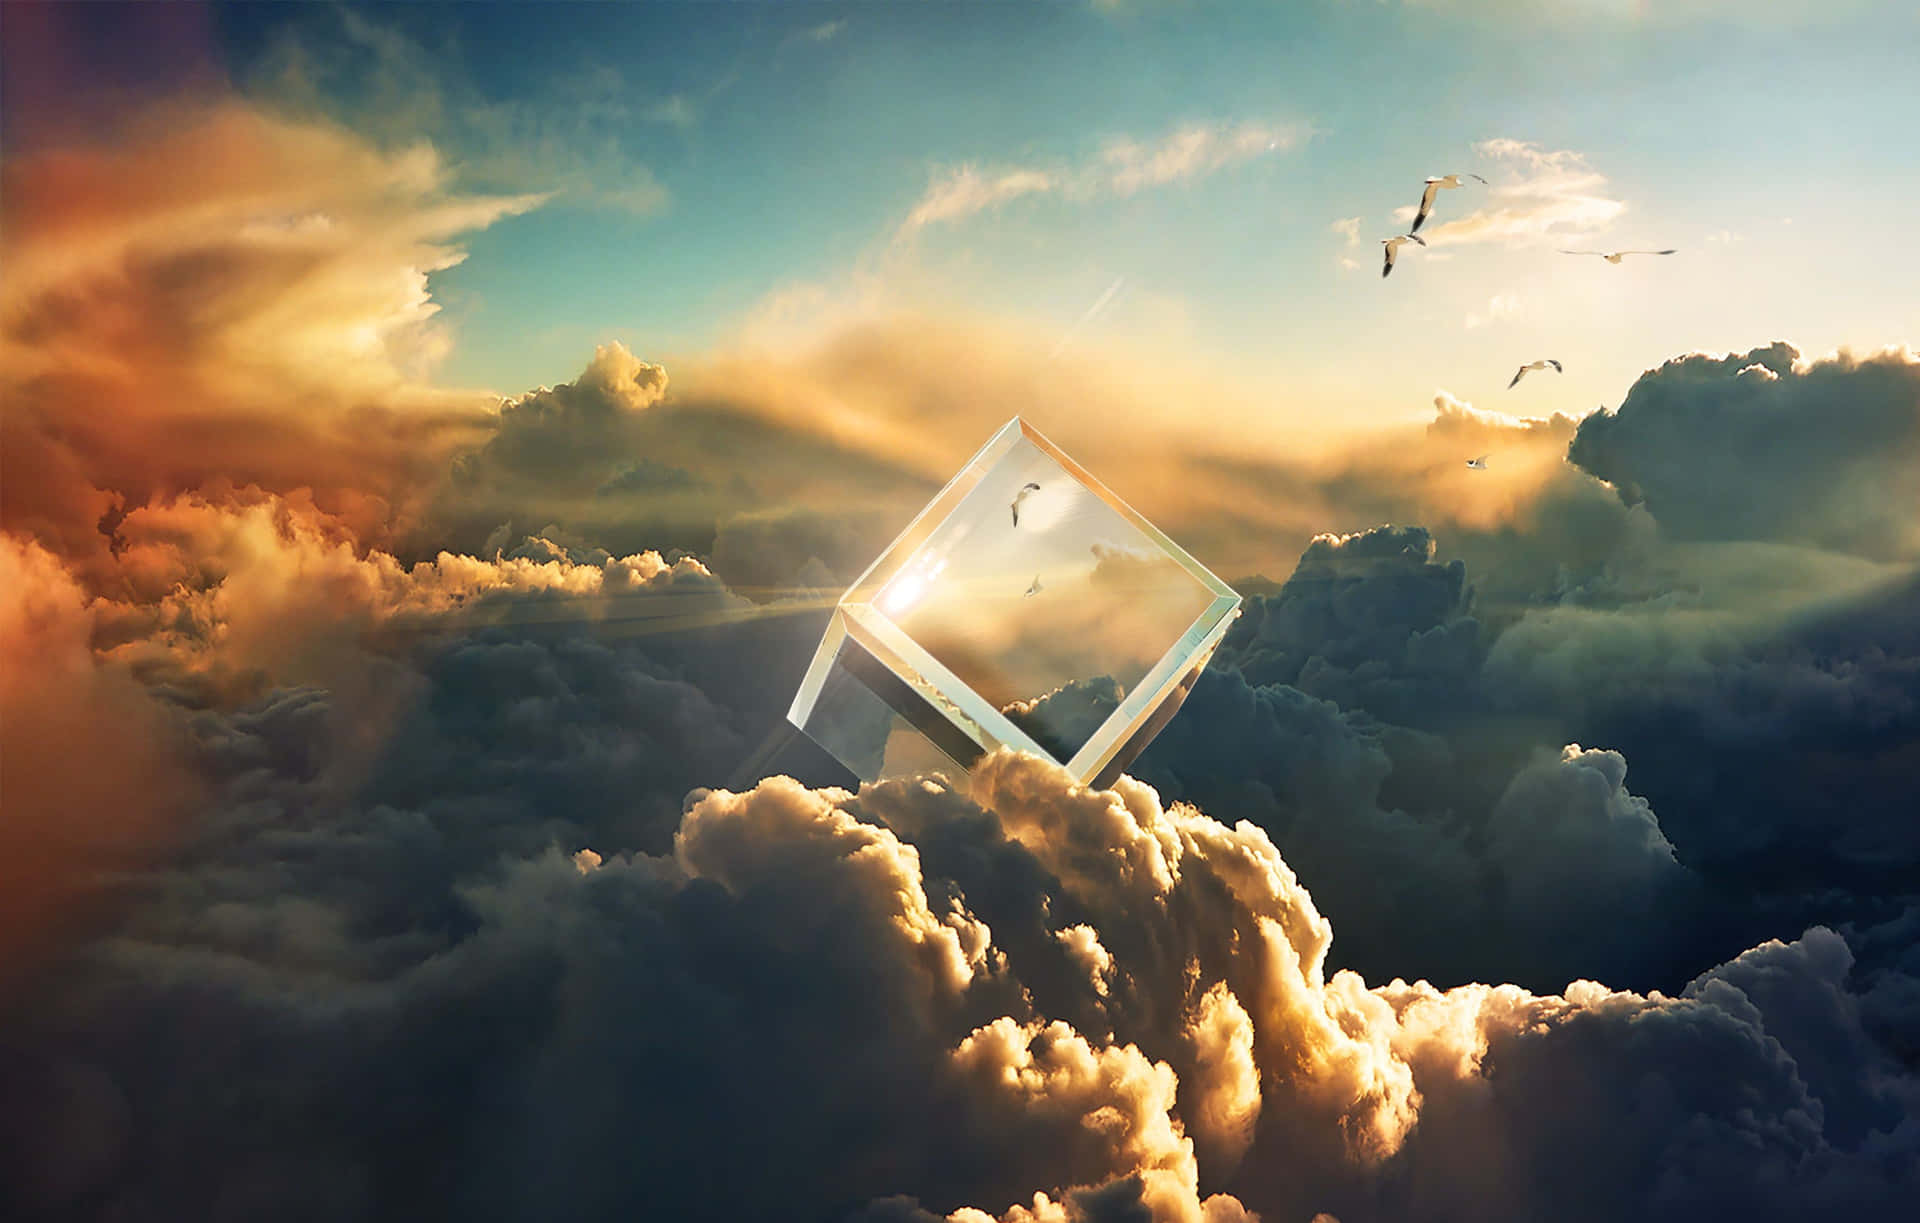 Clouds 4k Cube In Middle Wallpaper